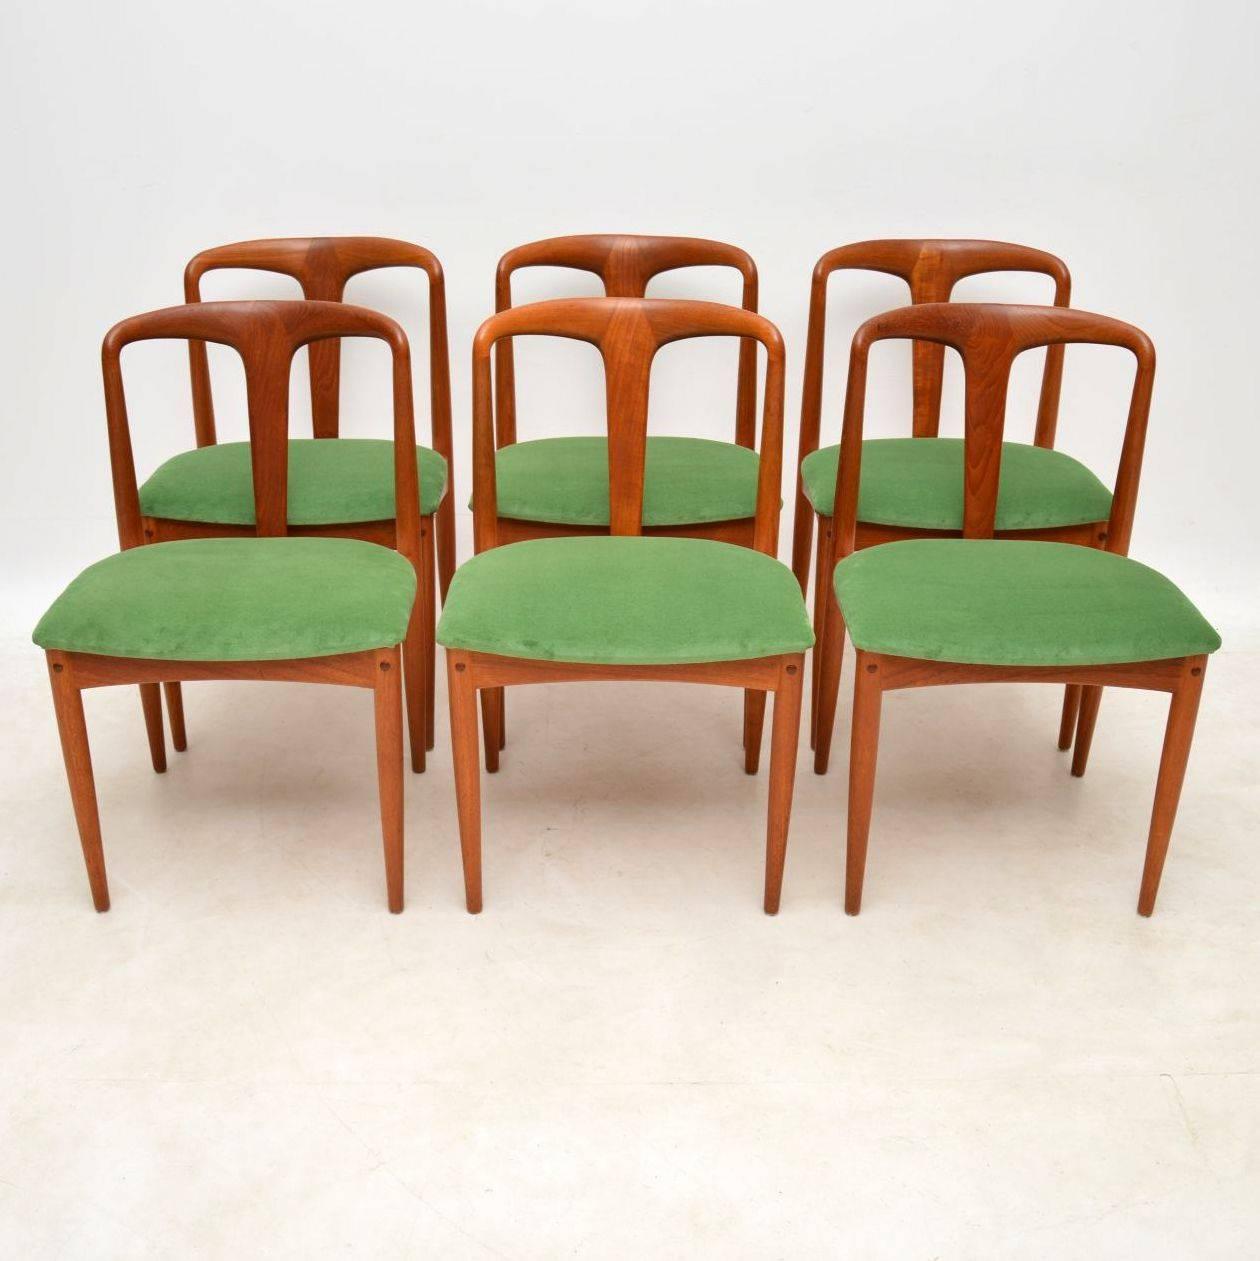 A beautiful and top quality set of six solid teak ‘Juliane’ dining chairs, these were made in Denmark by Uldum Mobelfabrik, they were designed by Johannes Andersen. They are extremely well made and are in superb condition for their age; they are all